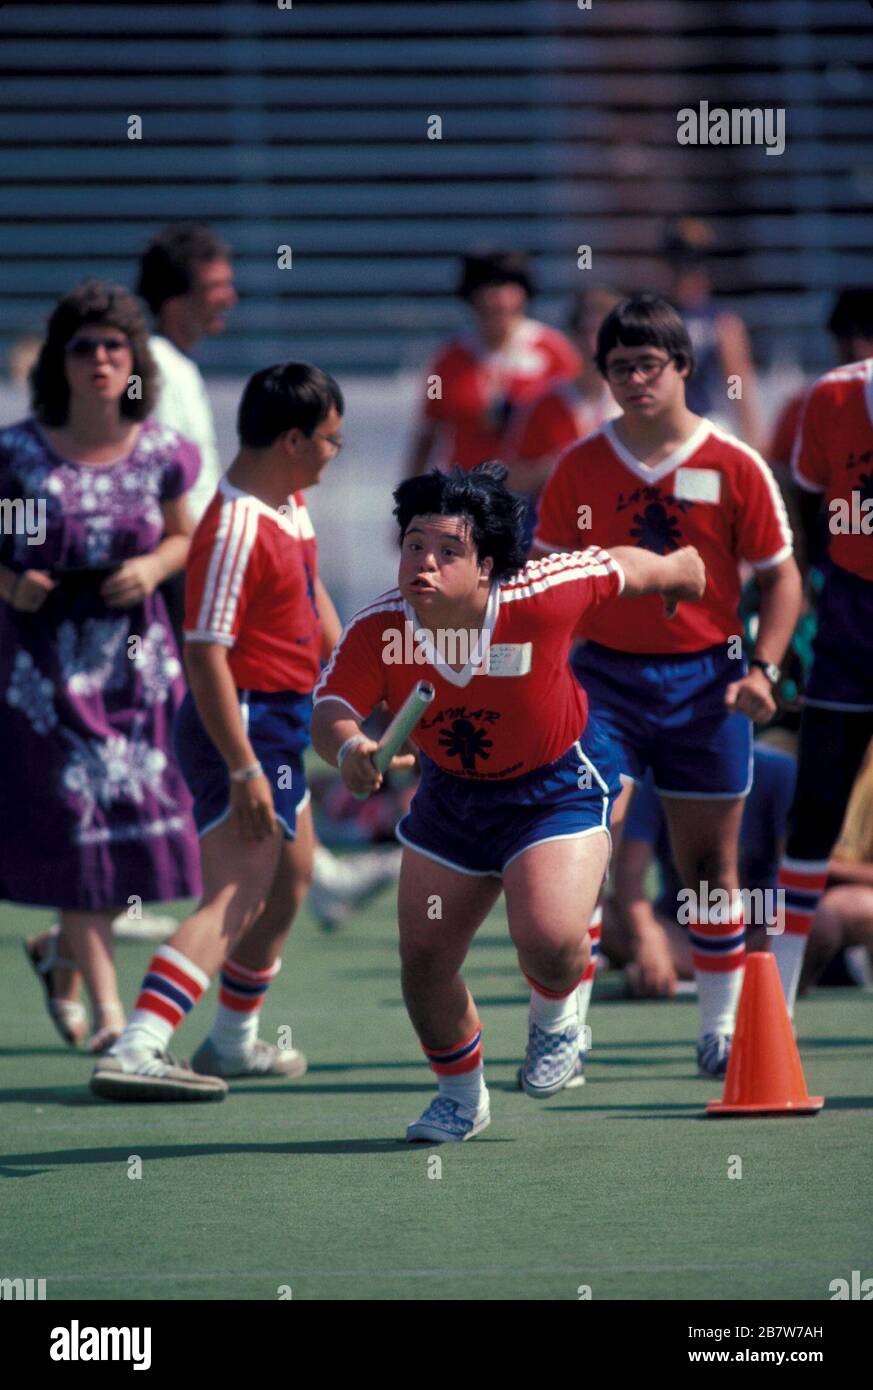 Austin Texas USA: Teen competitor holding baton starts her leg of a relay race during a Special Olympics track meet for intellectually disabled children.  ©Bob Daemmrich Stock Photo